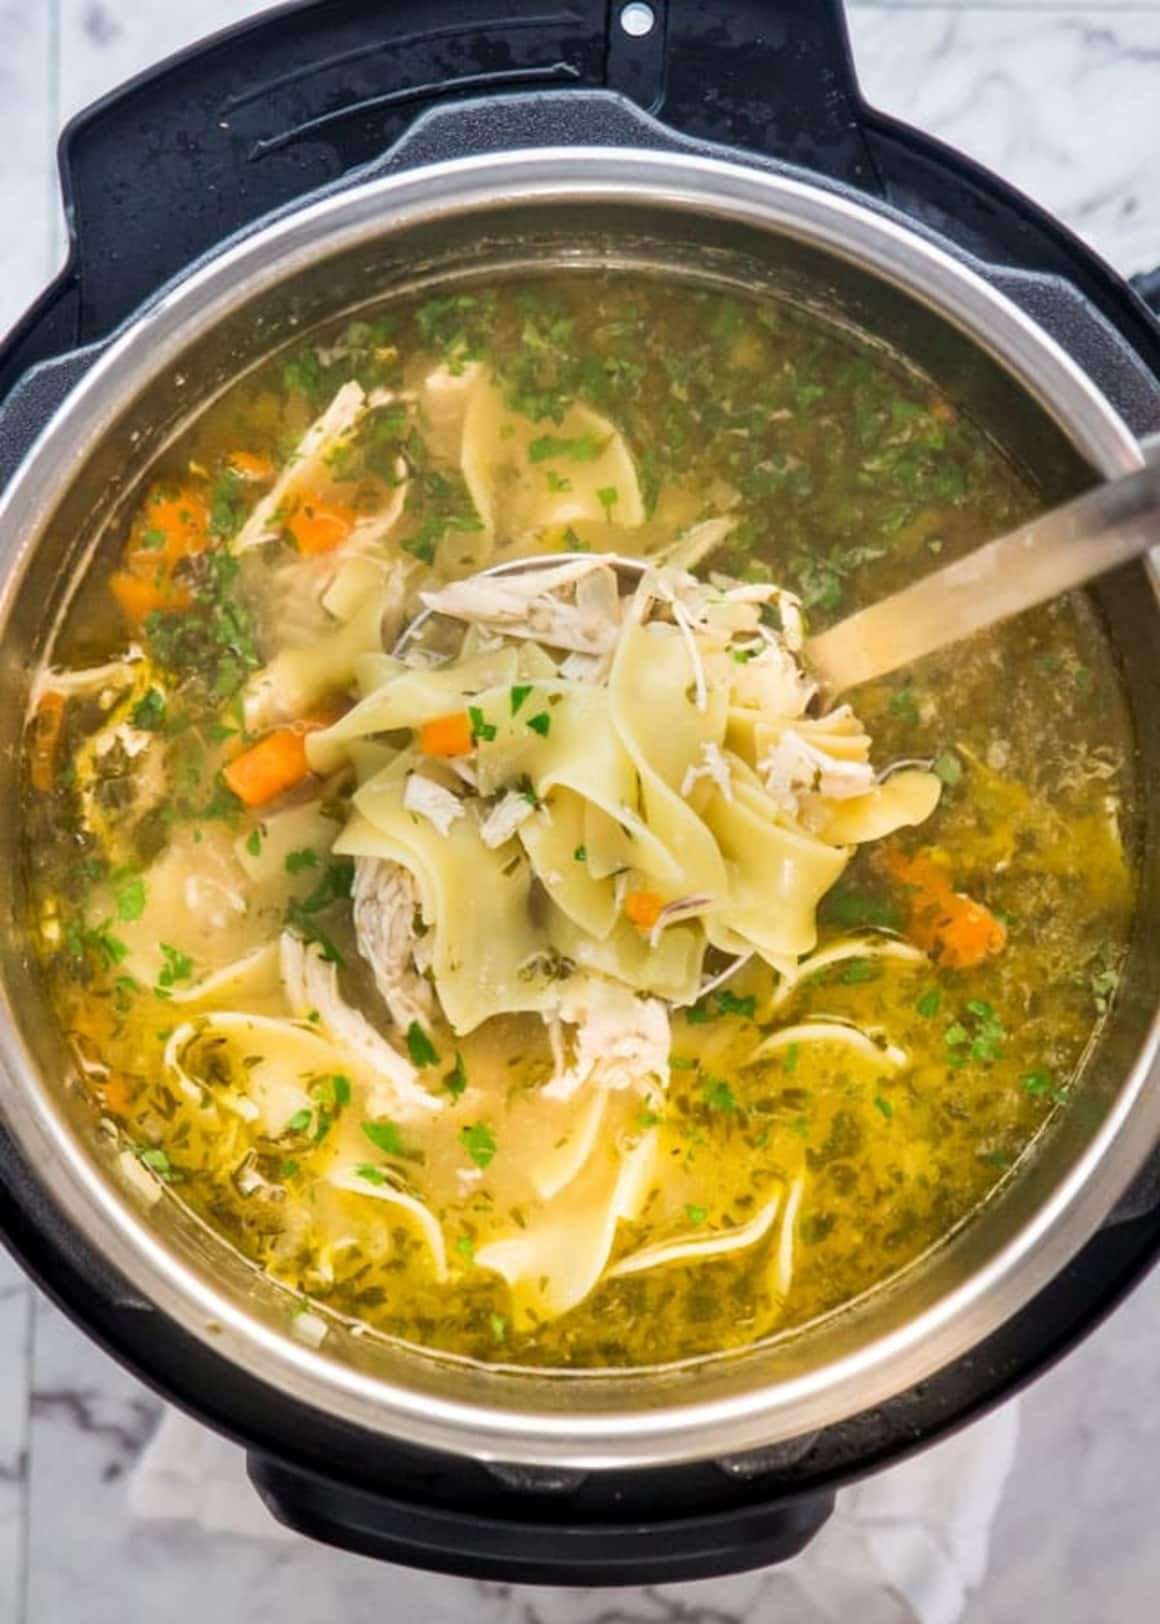 10 Healthy Instant Pot Recipes to Make Right Now